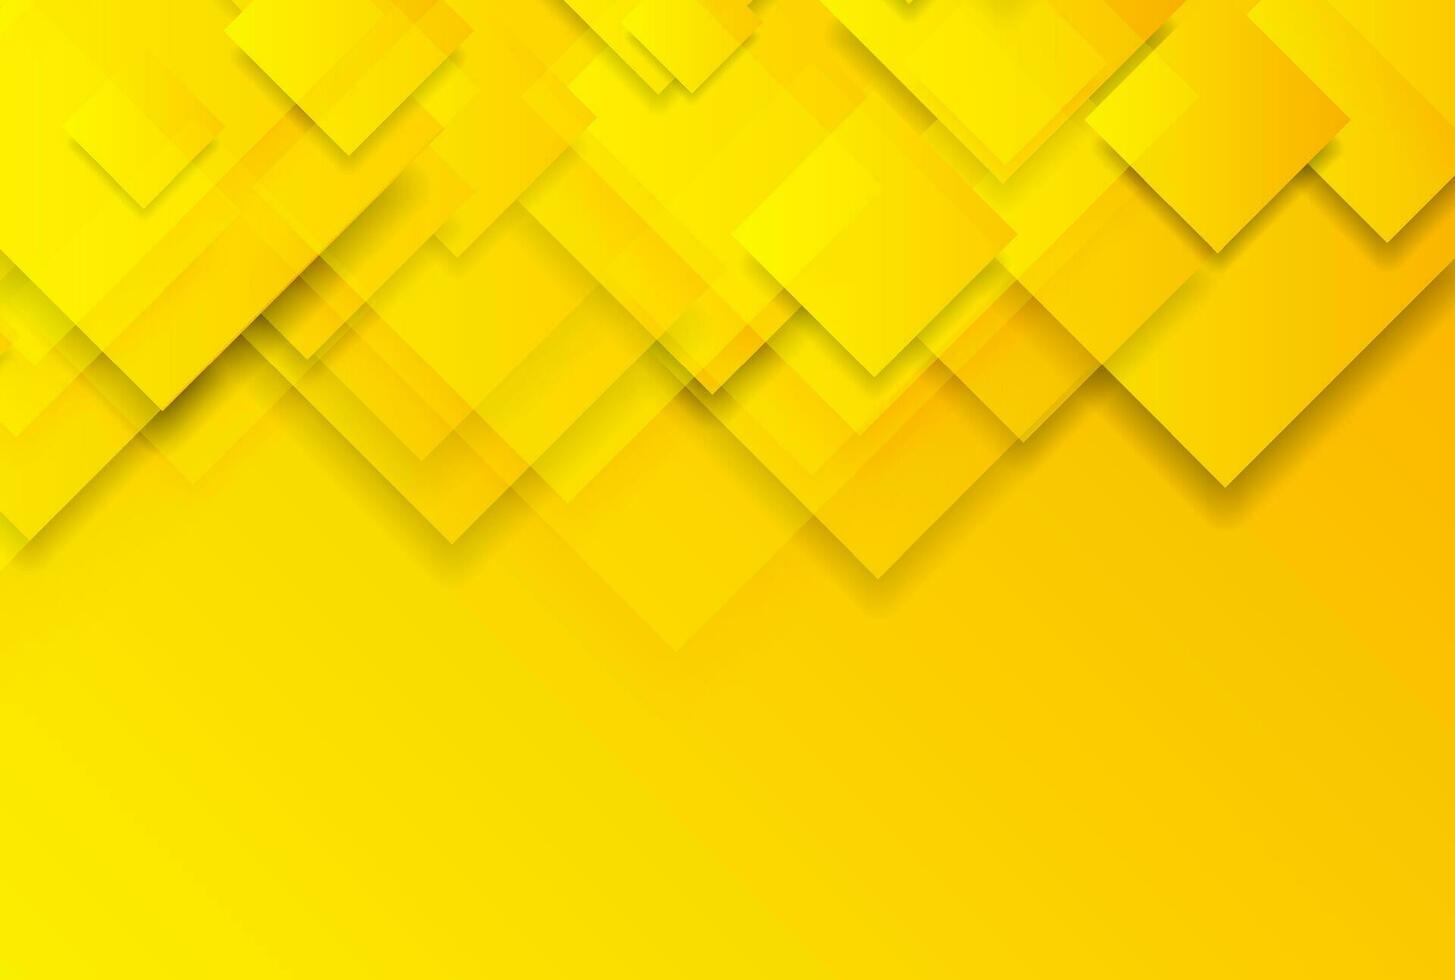 Bright yellow glossy squares abstract tech background vector